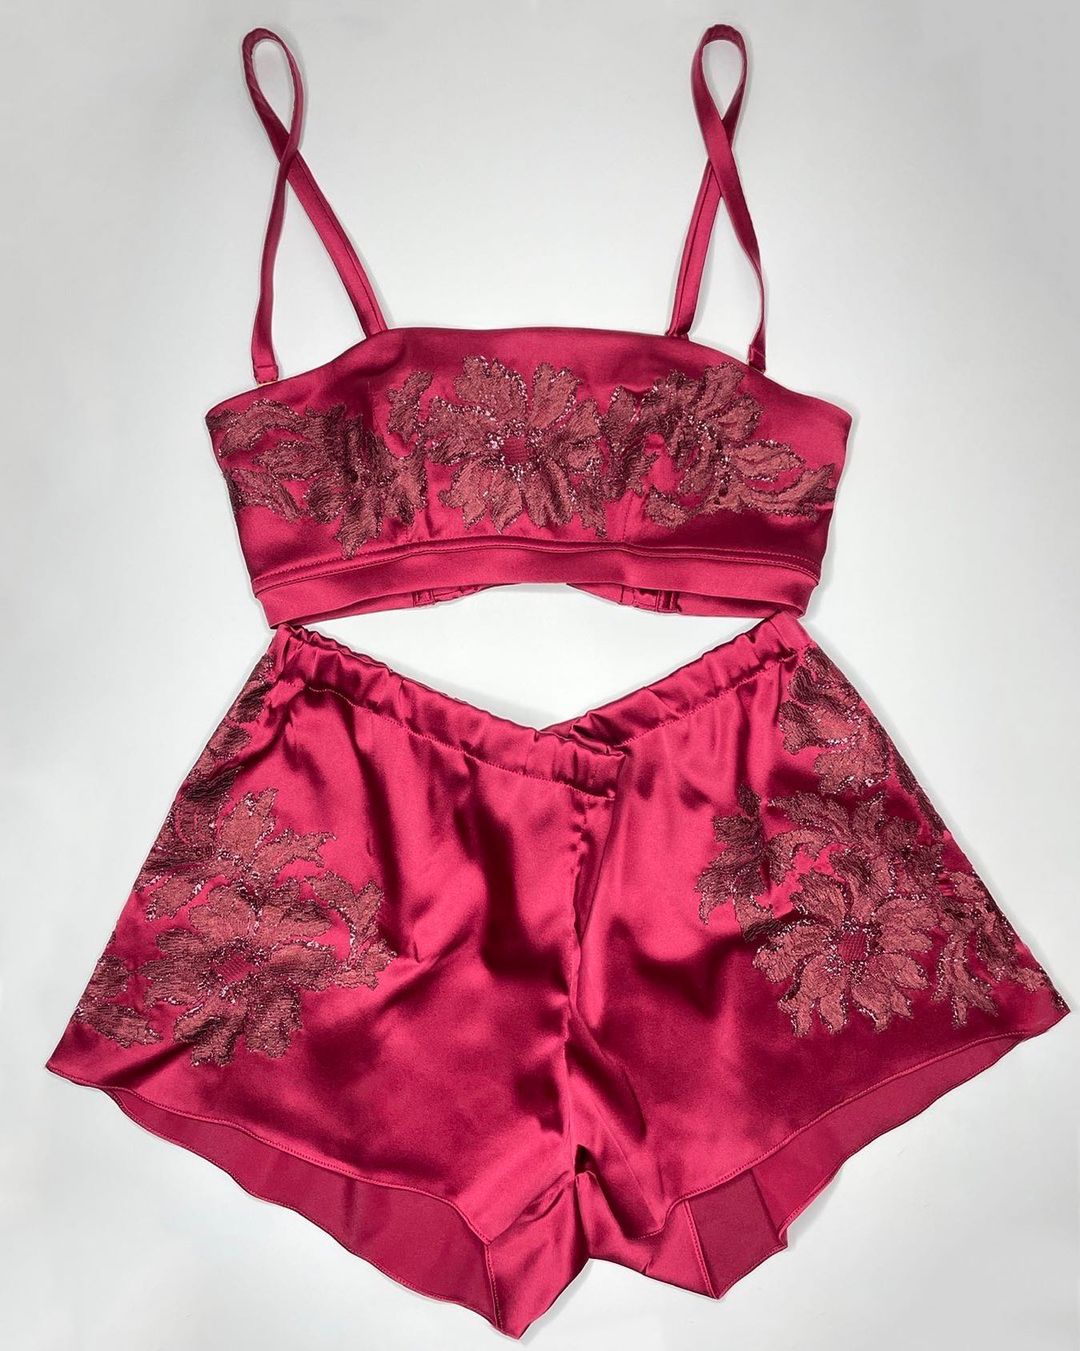 Freolic Luxury /silk and Lace bra and panty set as featured on Lingerie Briefs